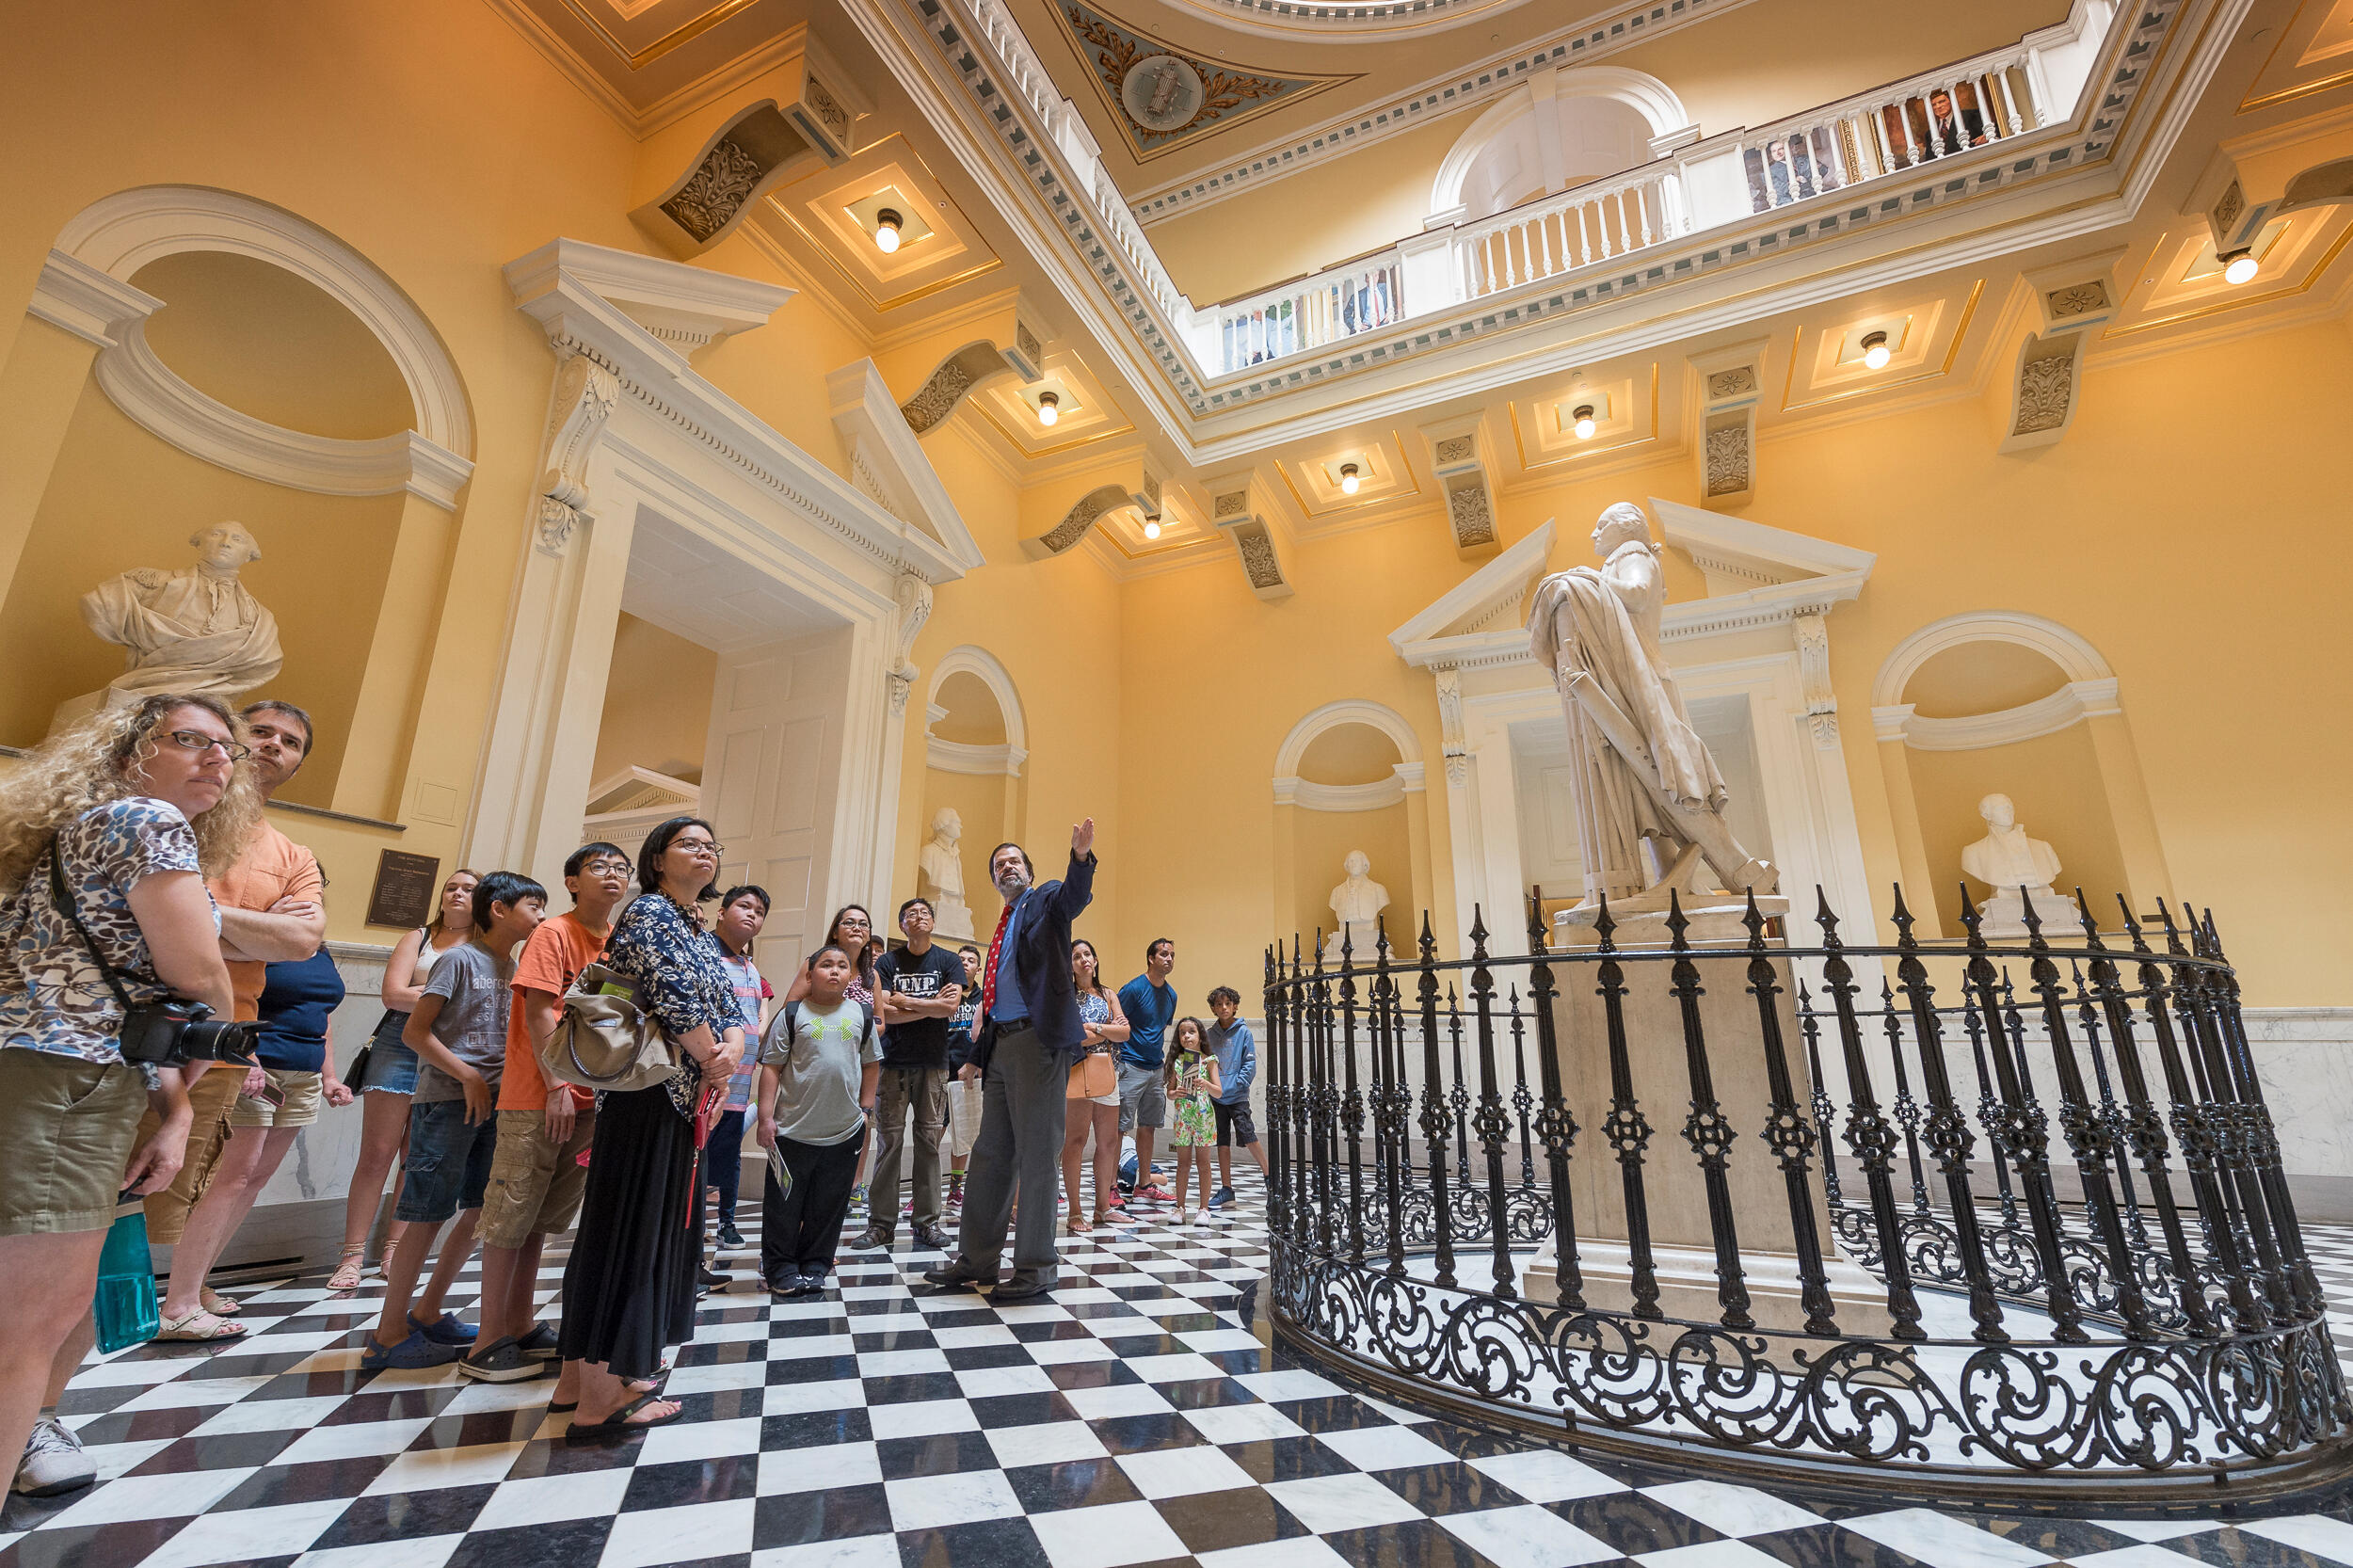 A tour guide takes a group of tourists past a statue of a historical figure and into an atrium at the Virginia State Capitol.